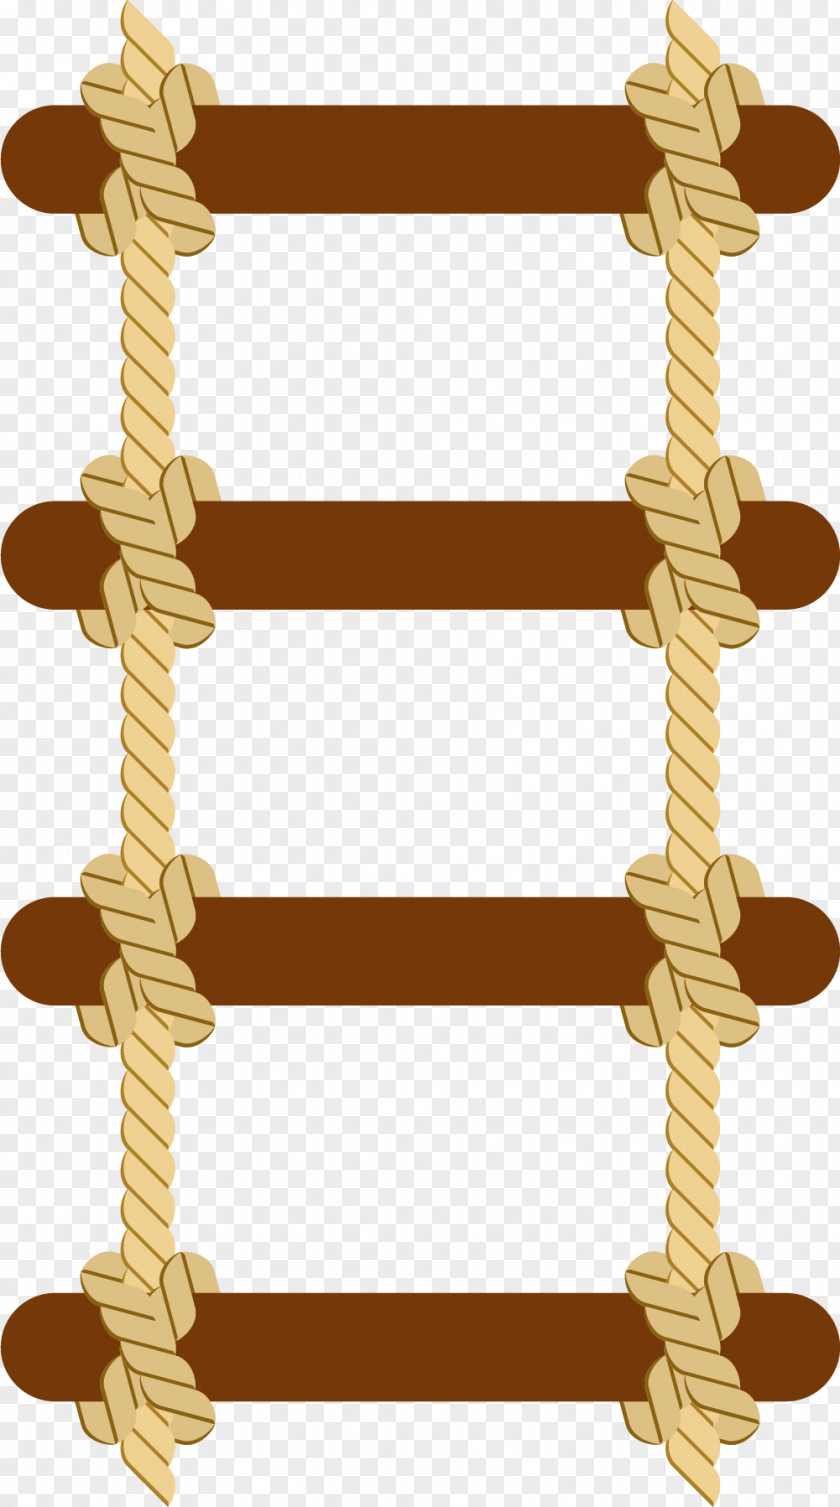 Simple Ladder Stairs Line Computer File PNG